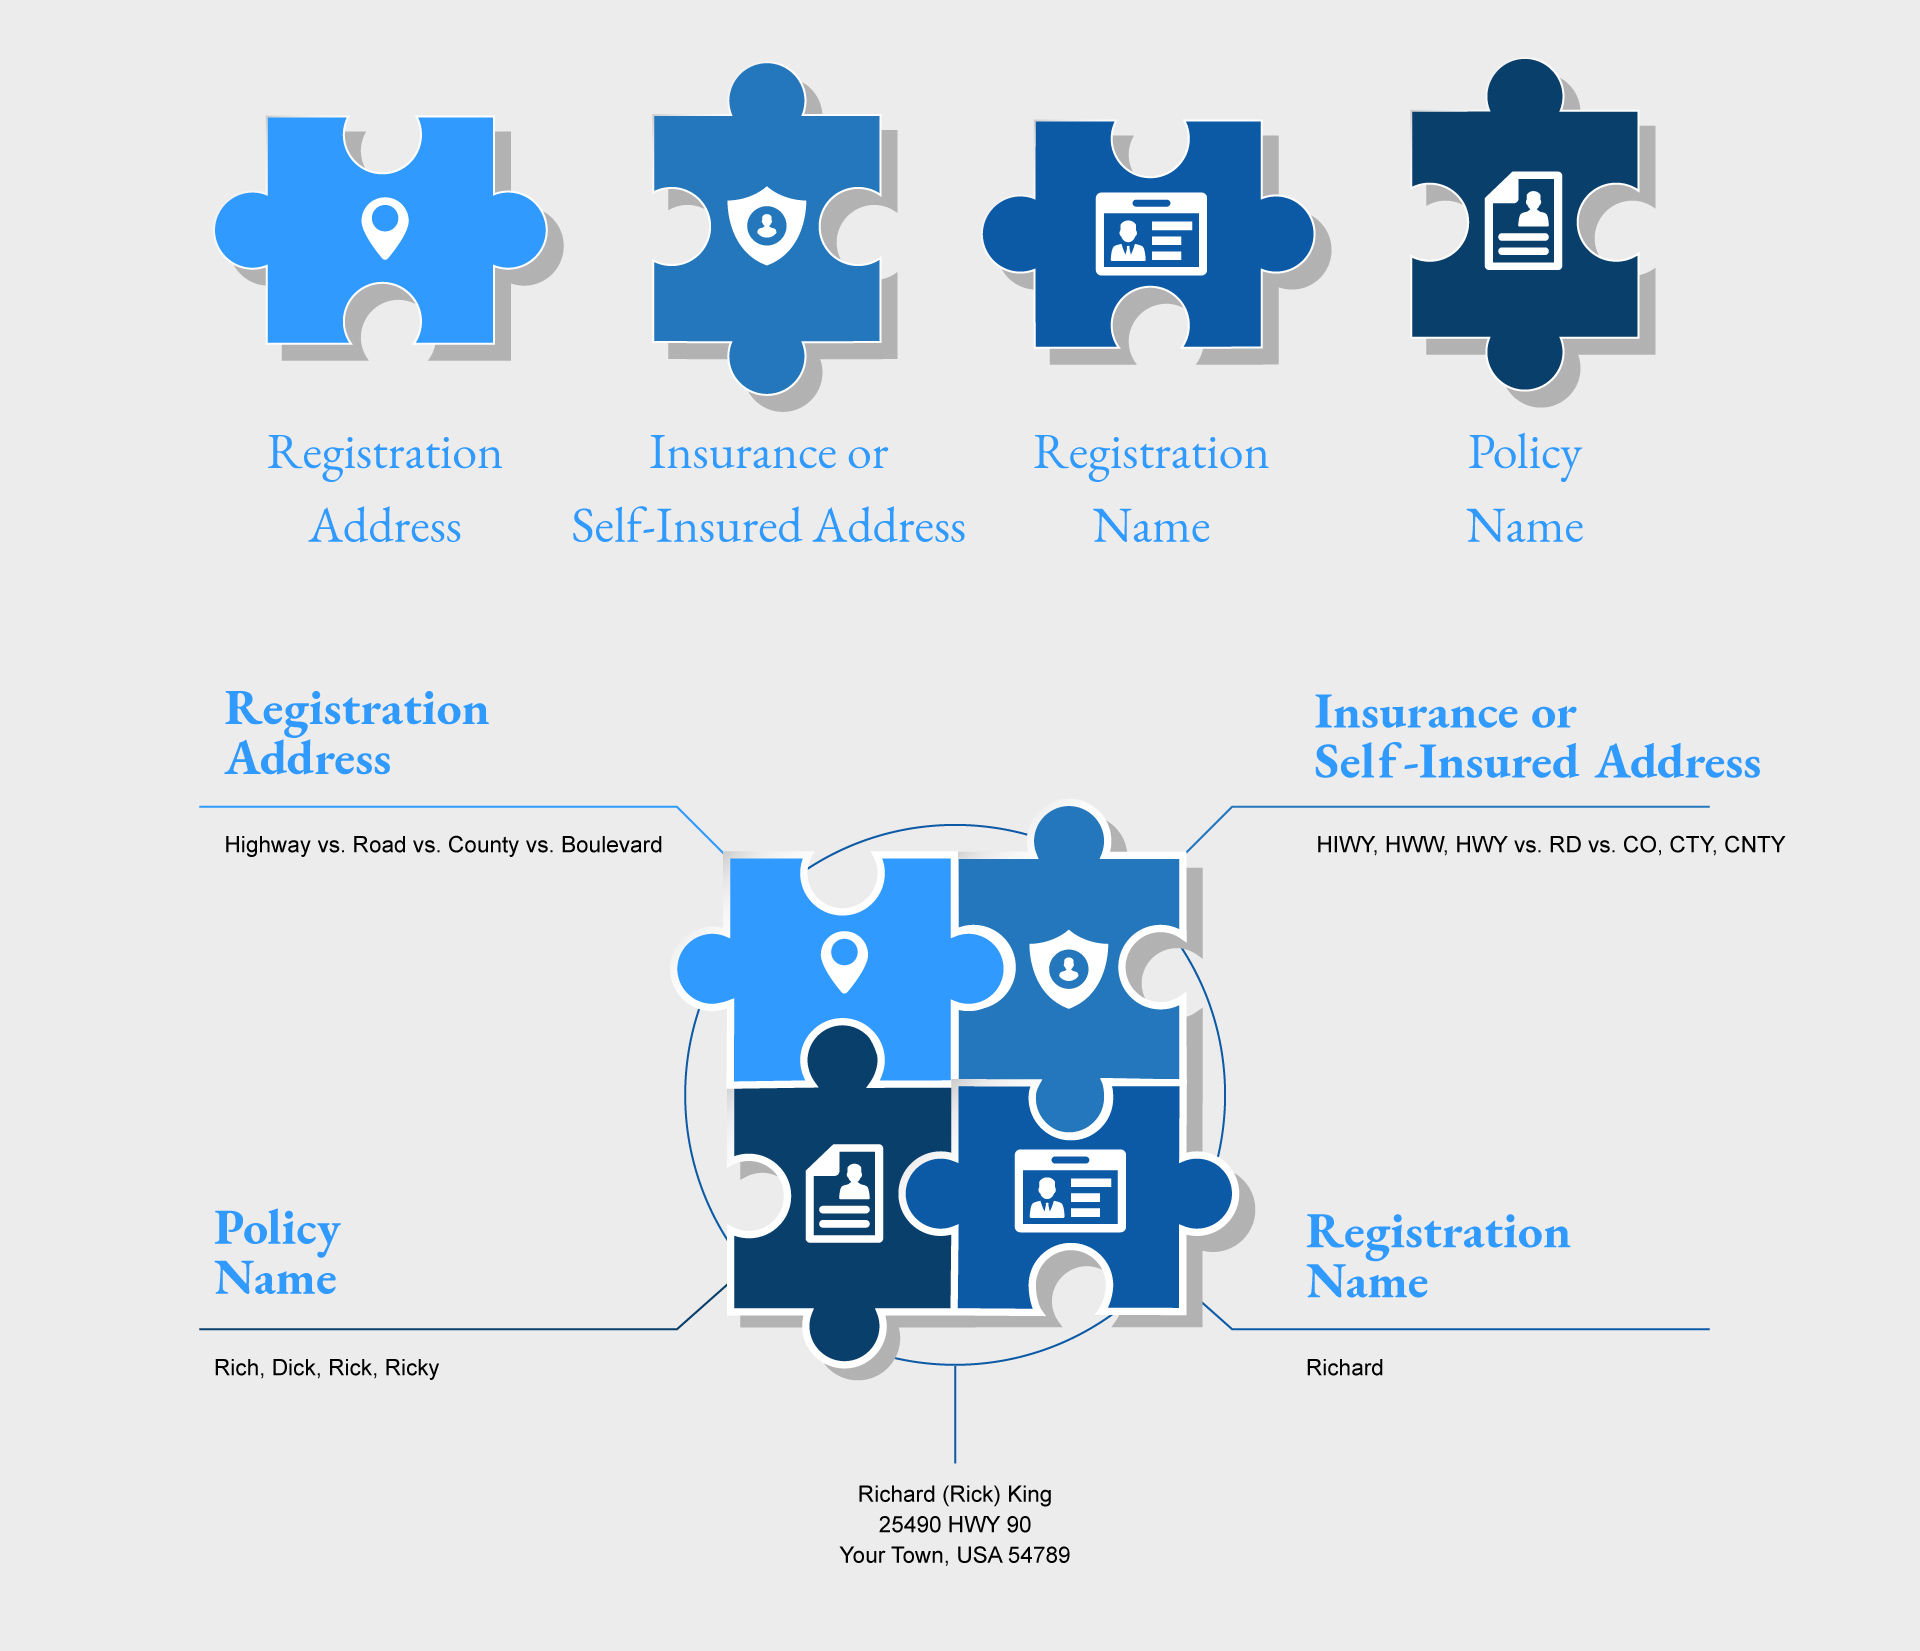 Infographic of Puzzle pieces of registration address, insurance address, policy name and registration named matched with puzzle pieces fitting together.